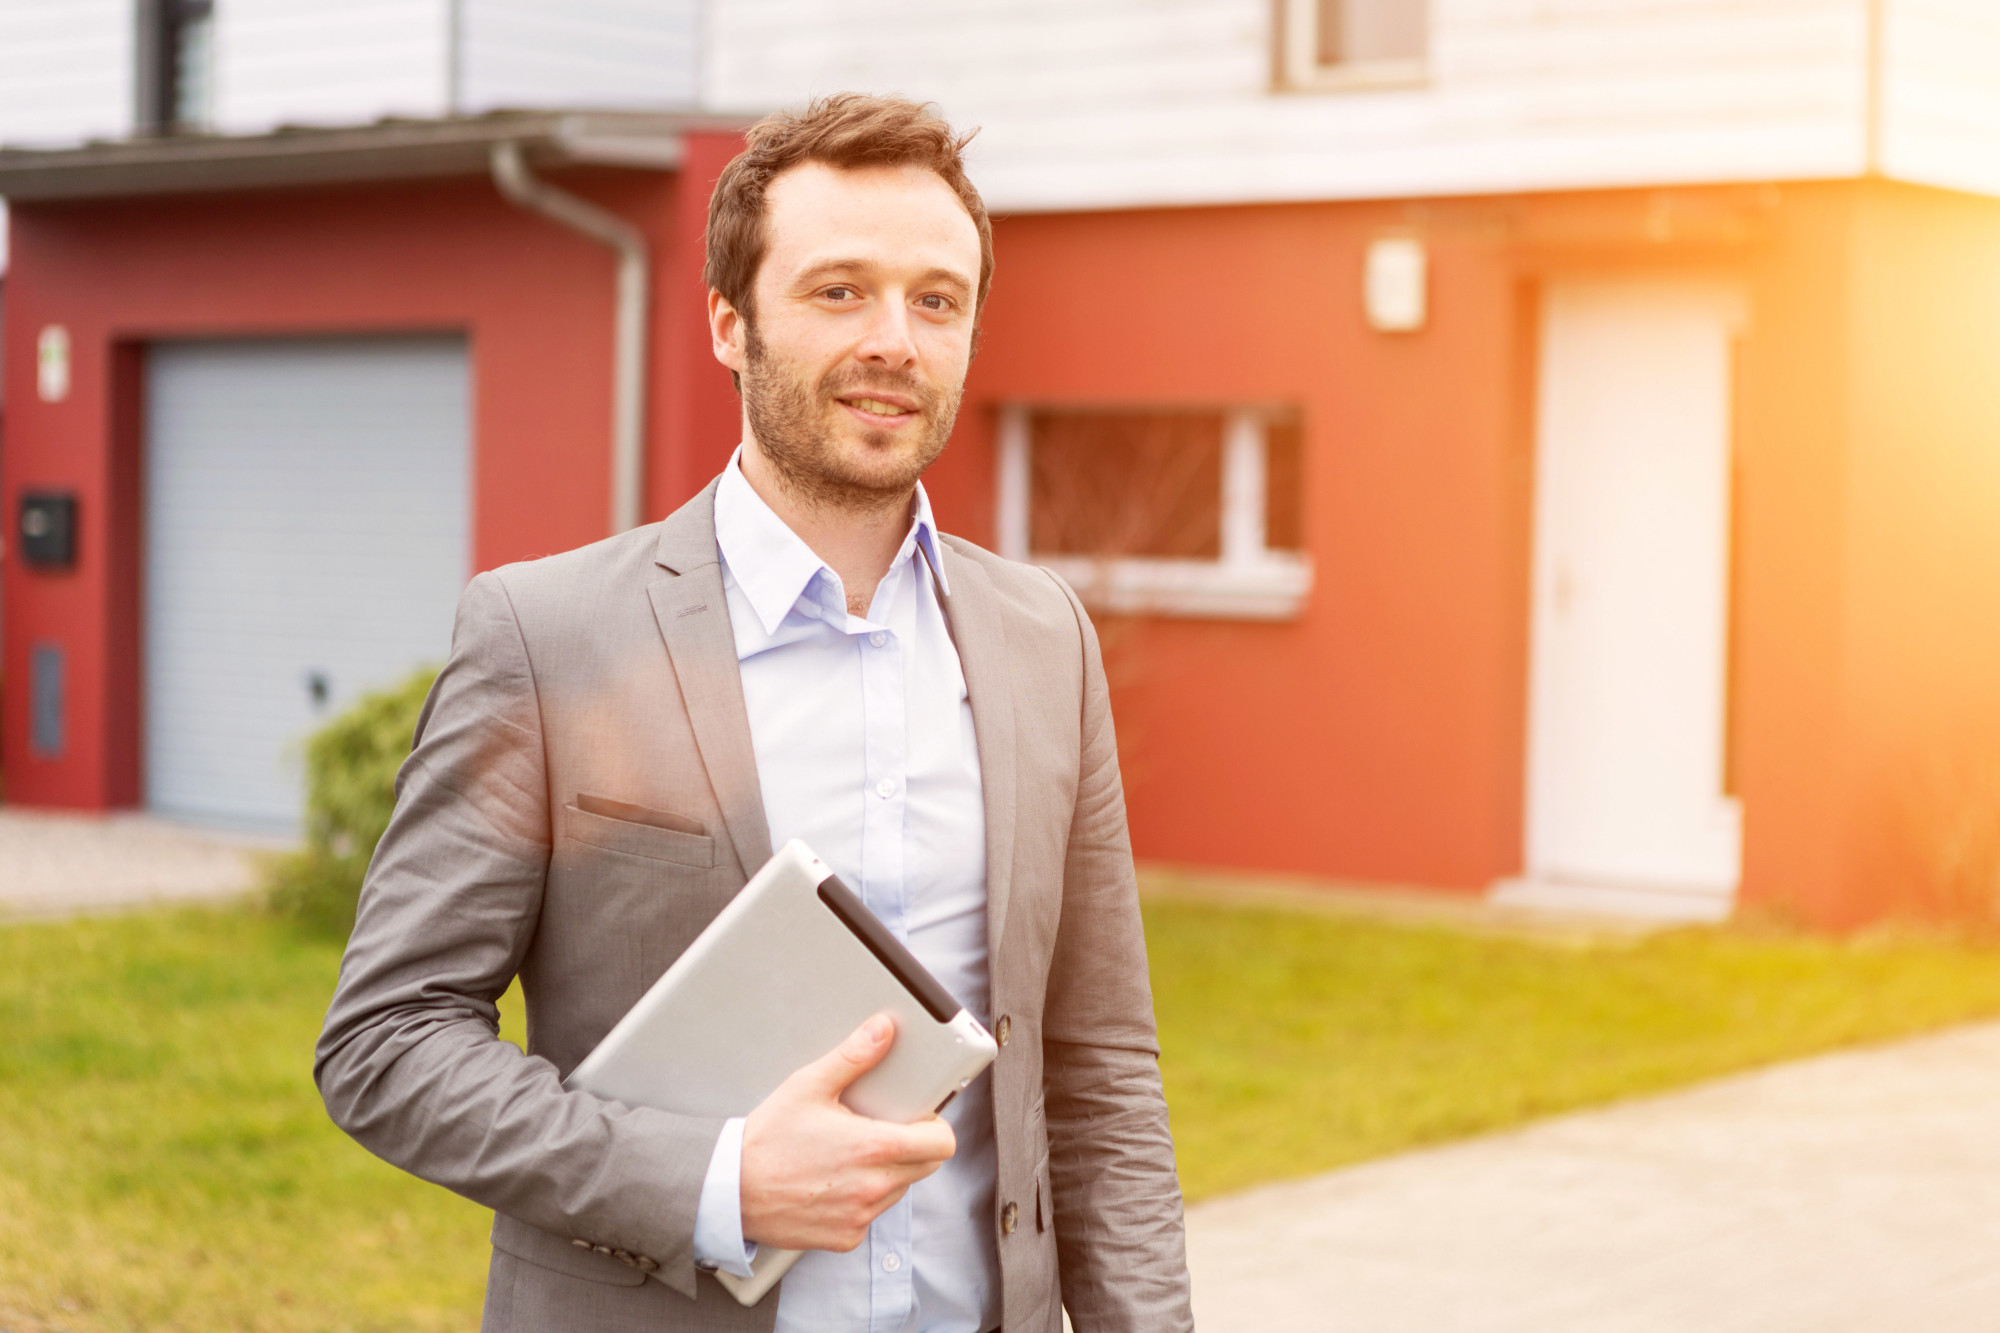 Everything to Consider When Choosing a Property Manager